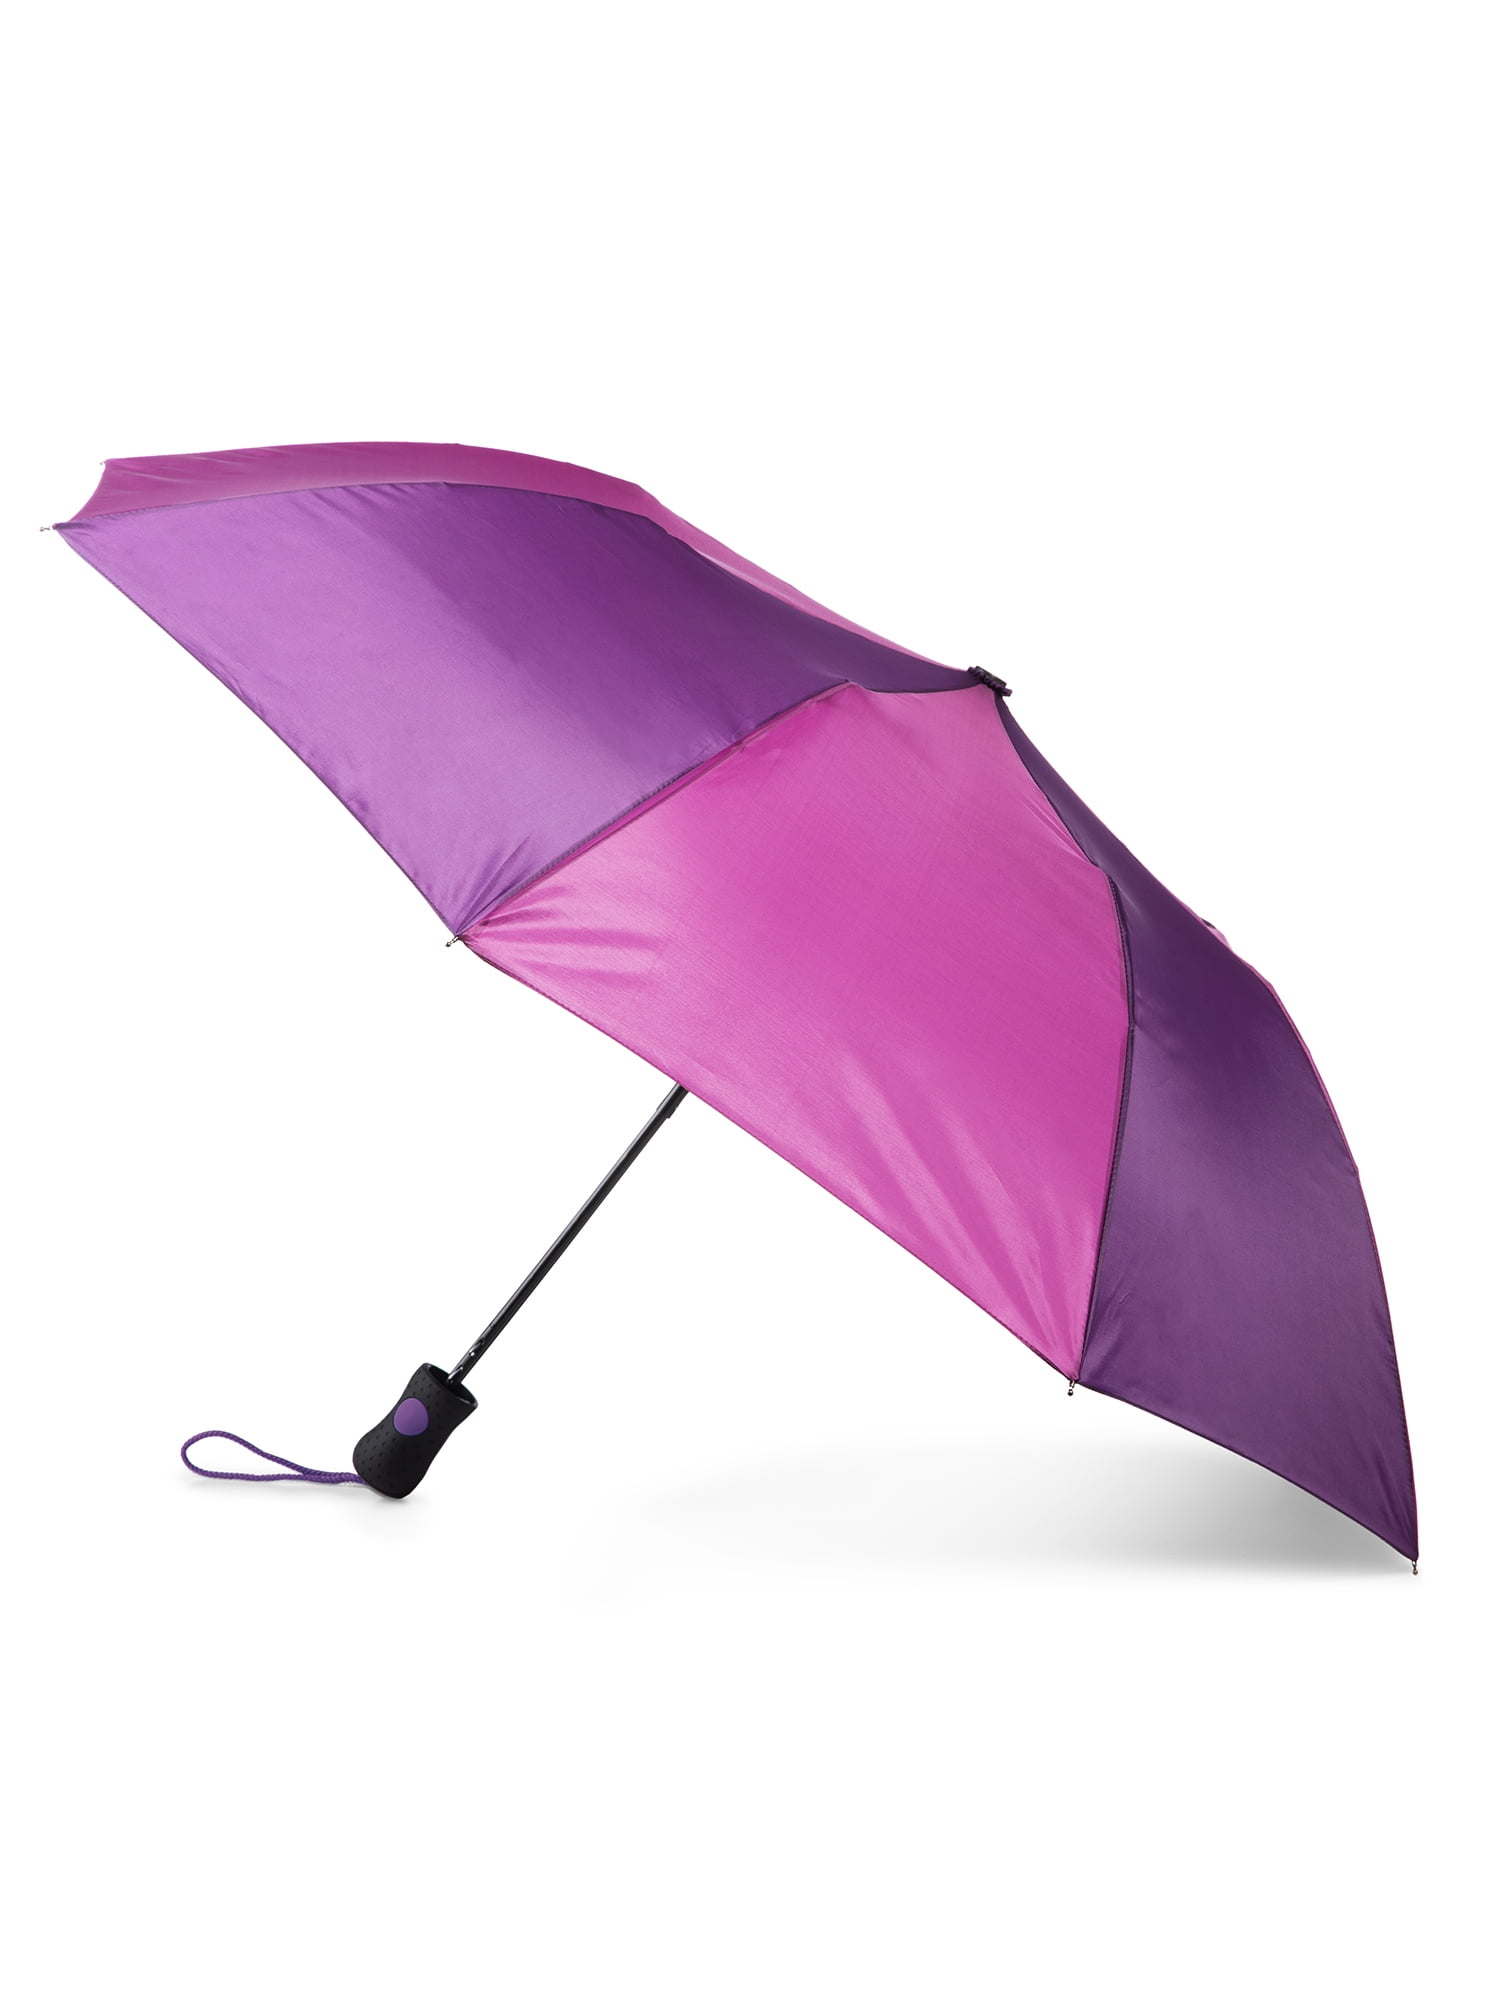 Totes Recycled Canopy Auto Open Umbrella